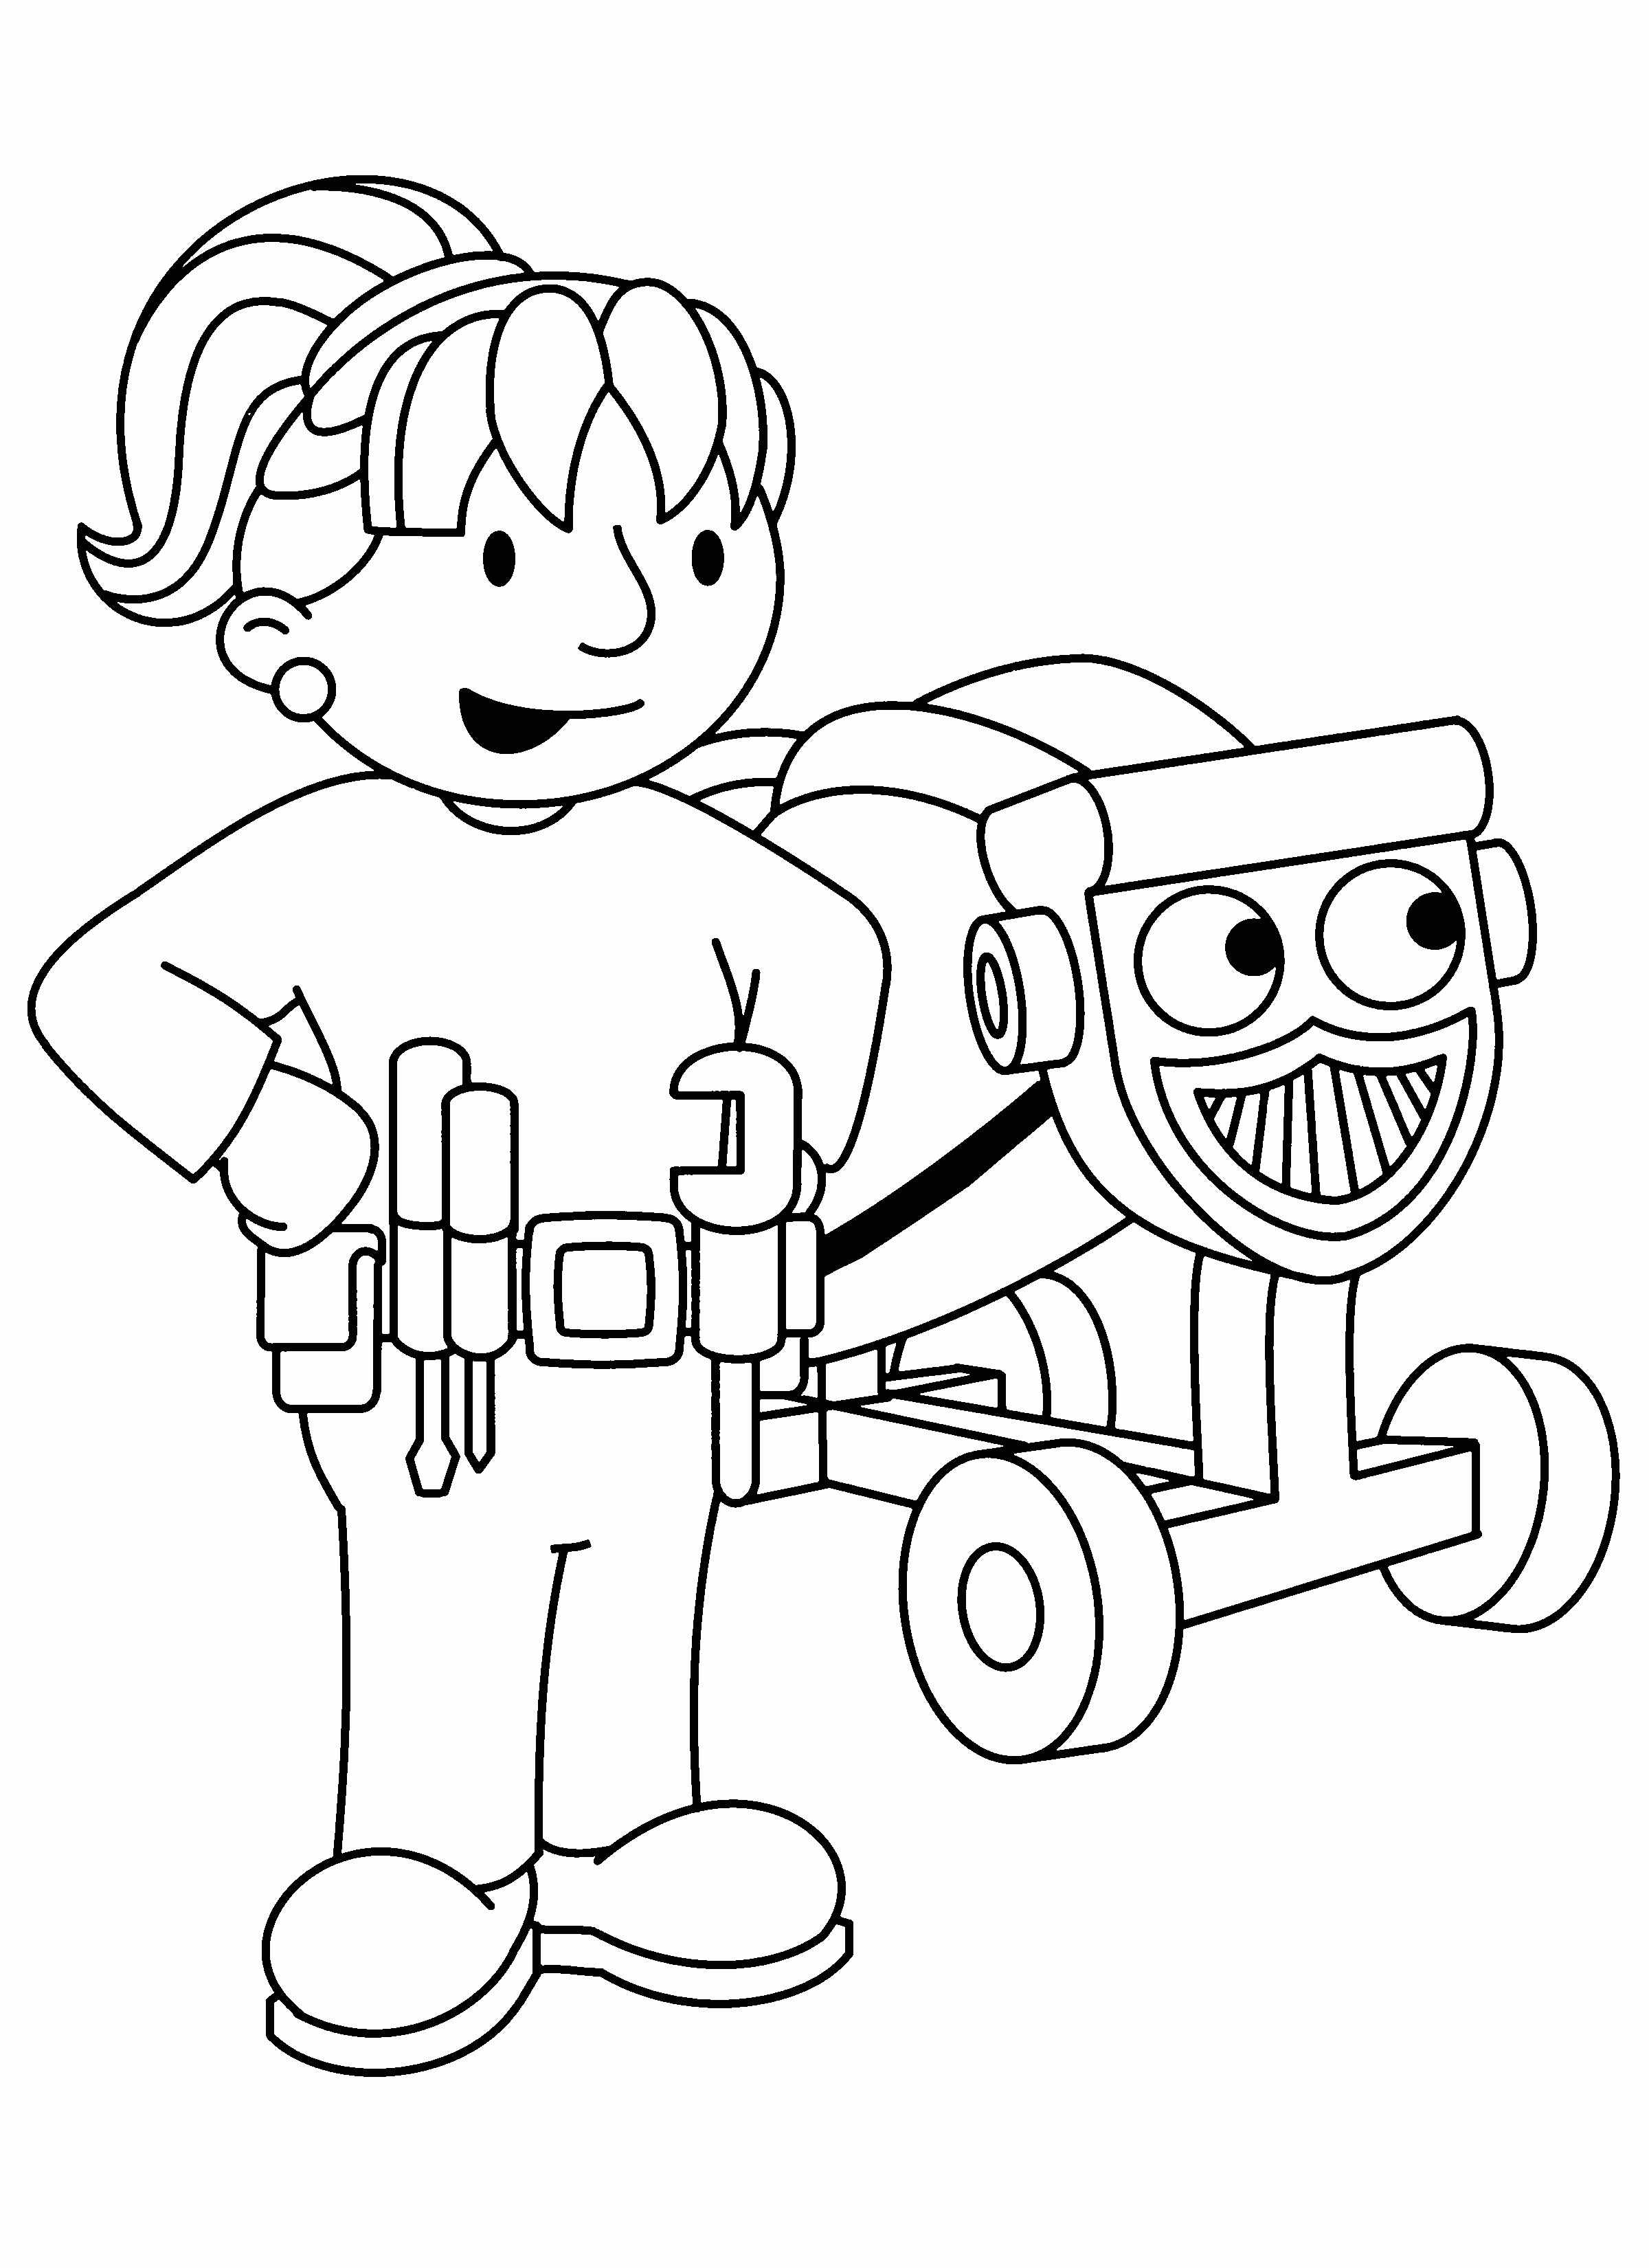 Train Bob The Builder Coloring Pages Widetheme